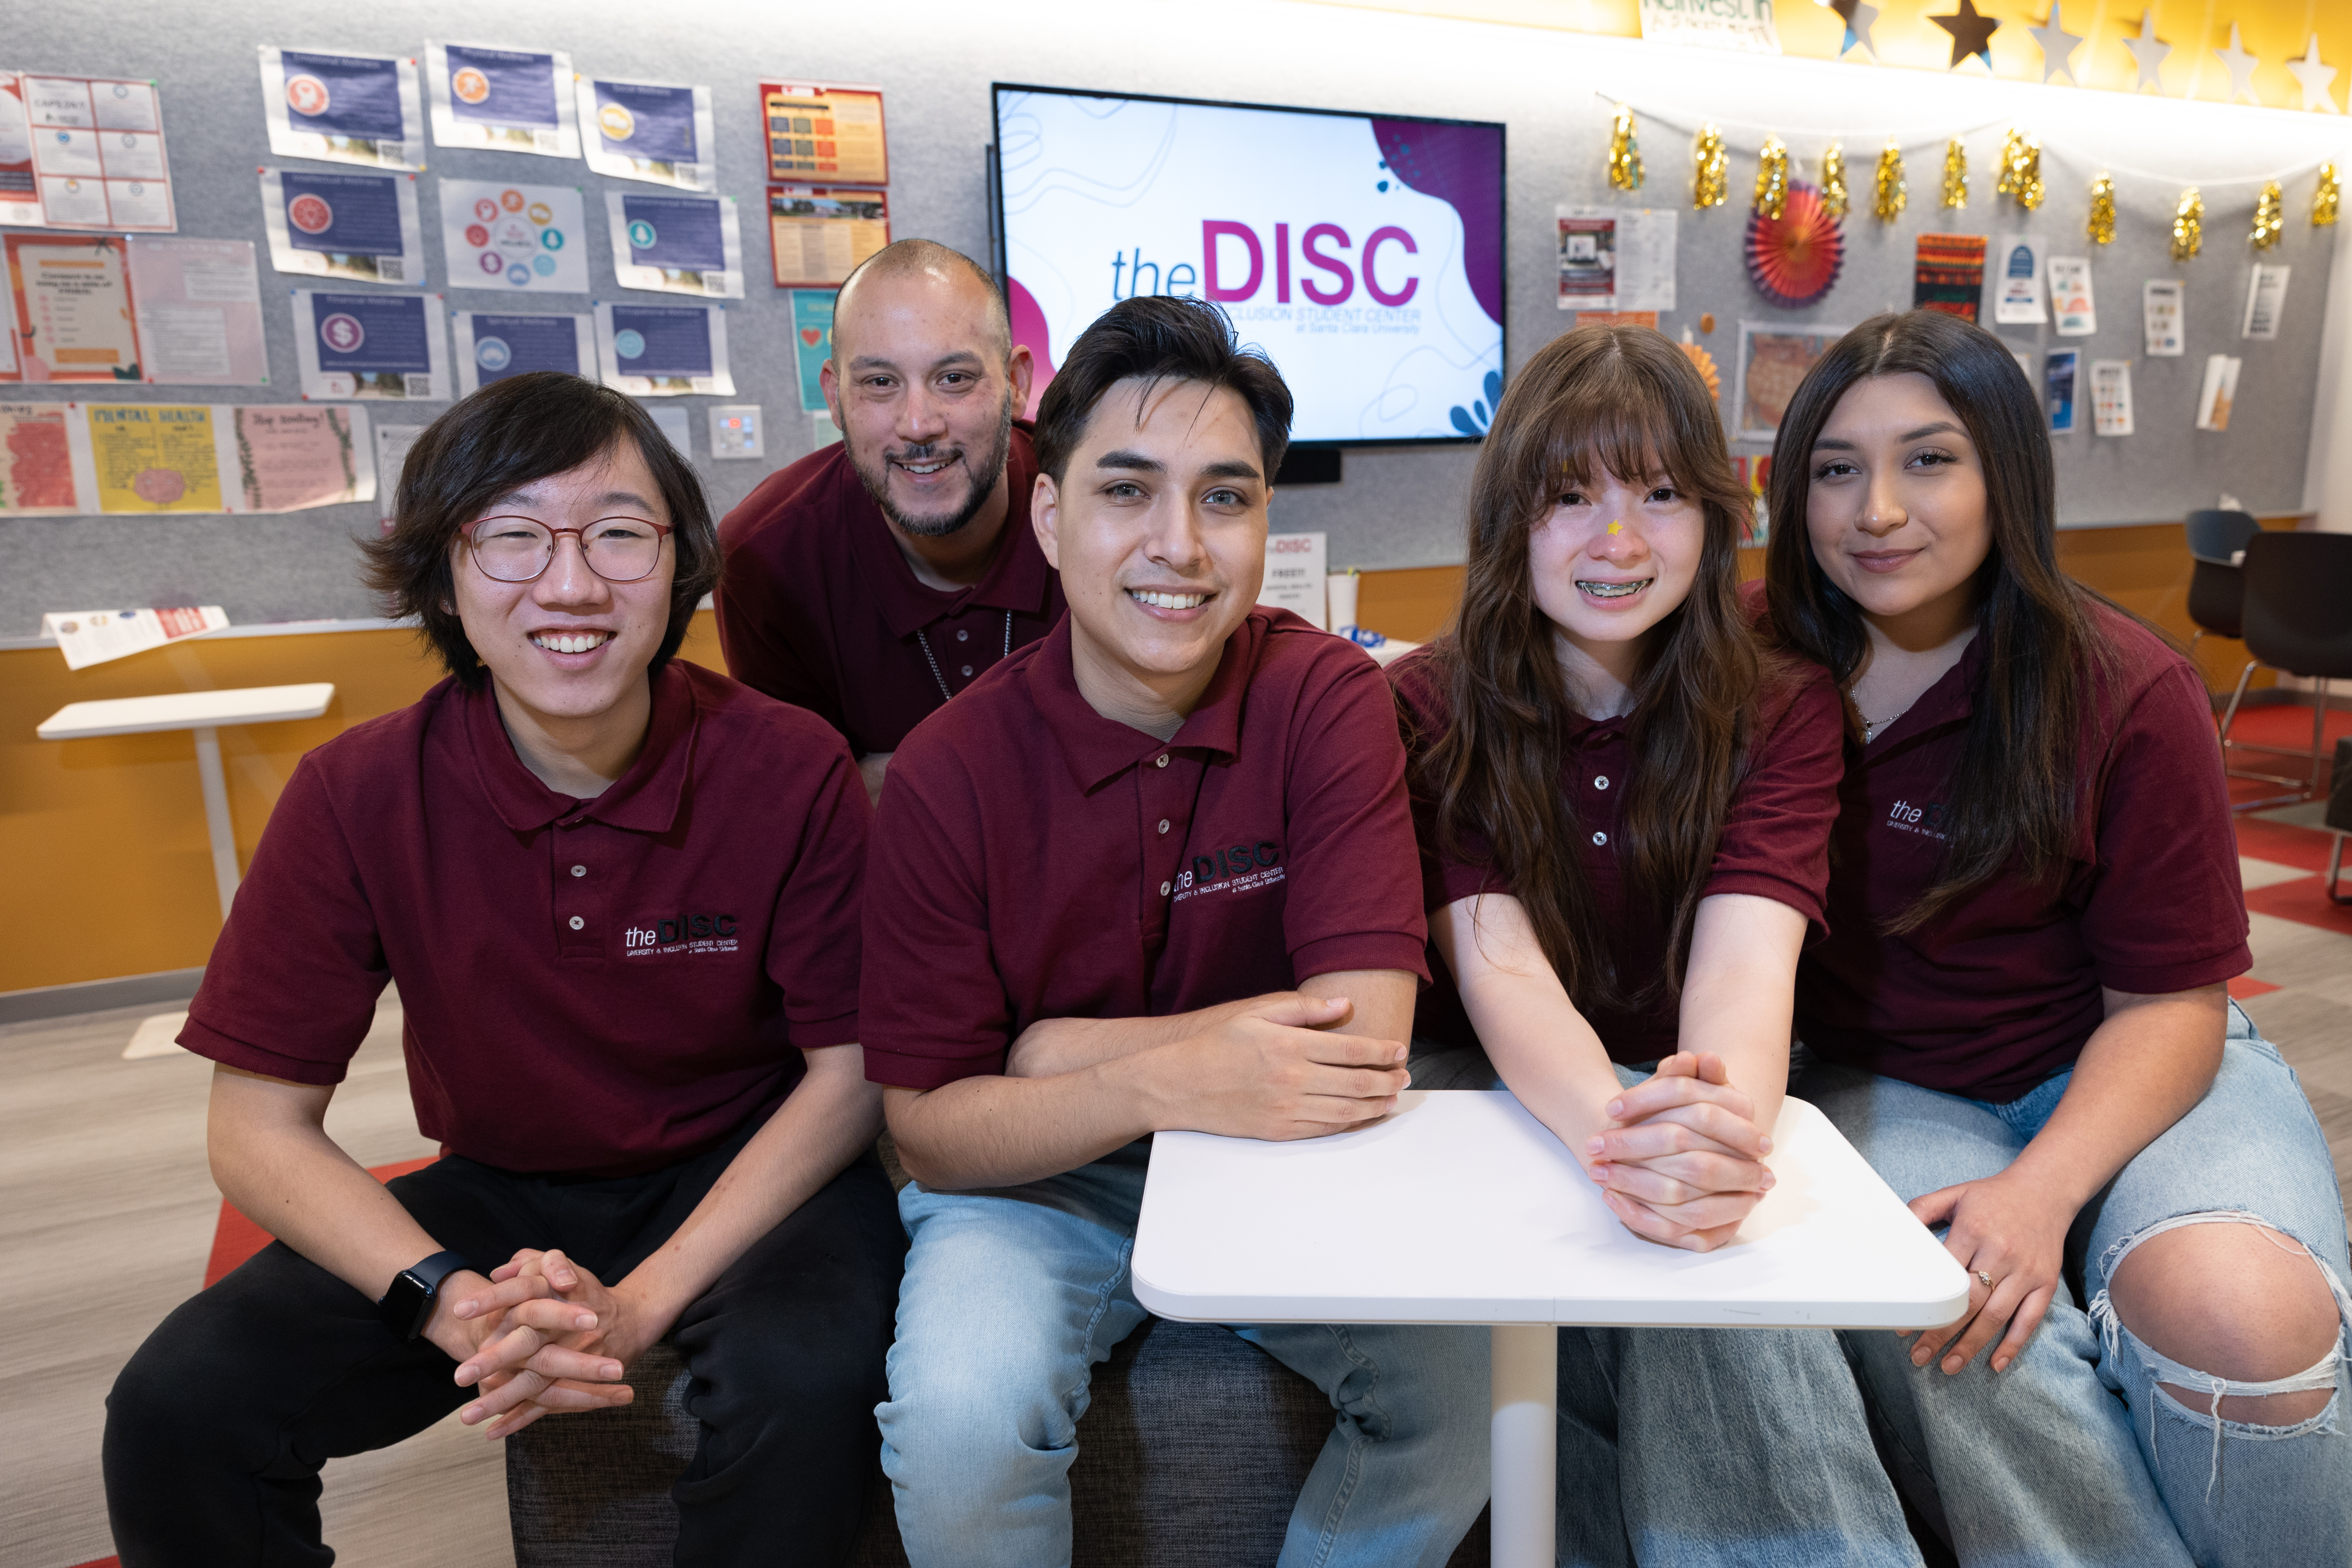 Group photo of DISC Staff. Kenneth park (left), Ricardo Padilla (second from left), Cristian Ramirez Lomeli (middle) , Brynn Kramer (second from right), Michelle Calderon Flores (right).